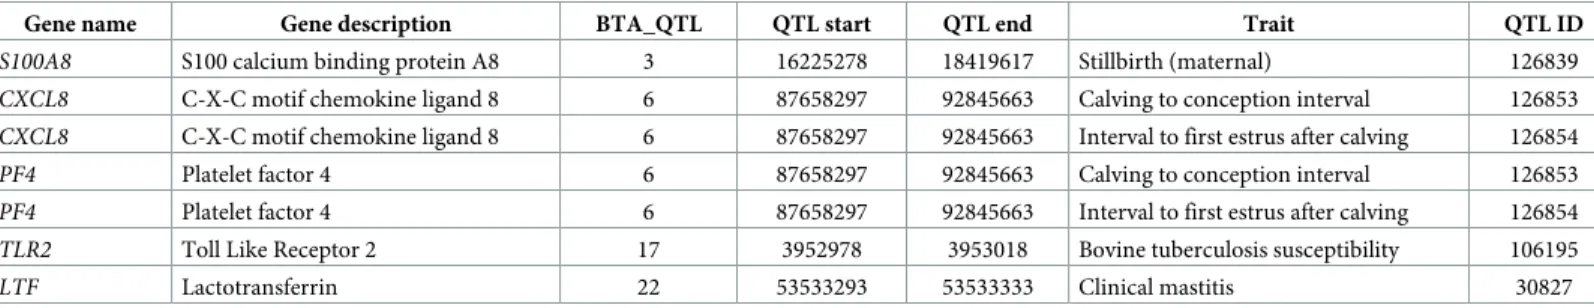 Table 2. Information on bovine Quantitative Trait Loci (QTL) related to reproduction traits overlapping with selected differentially expressed genes (DEGs).